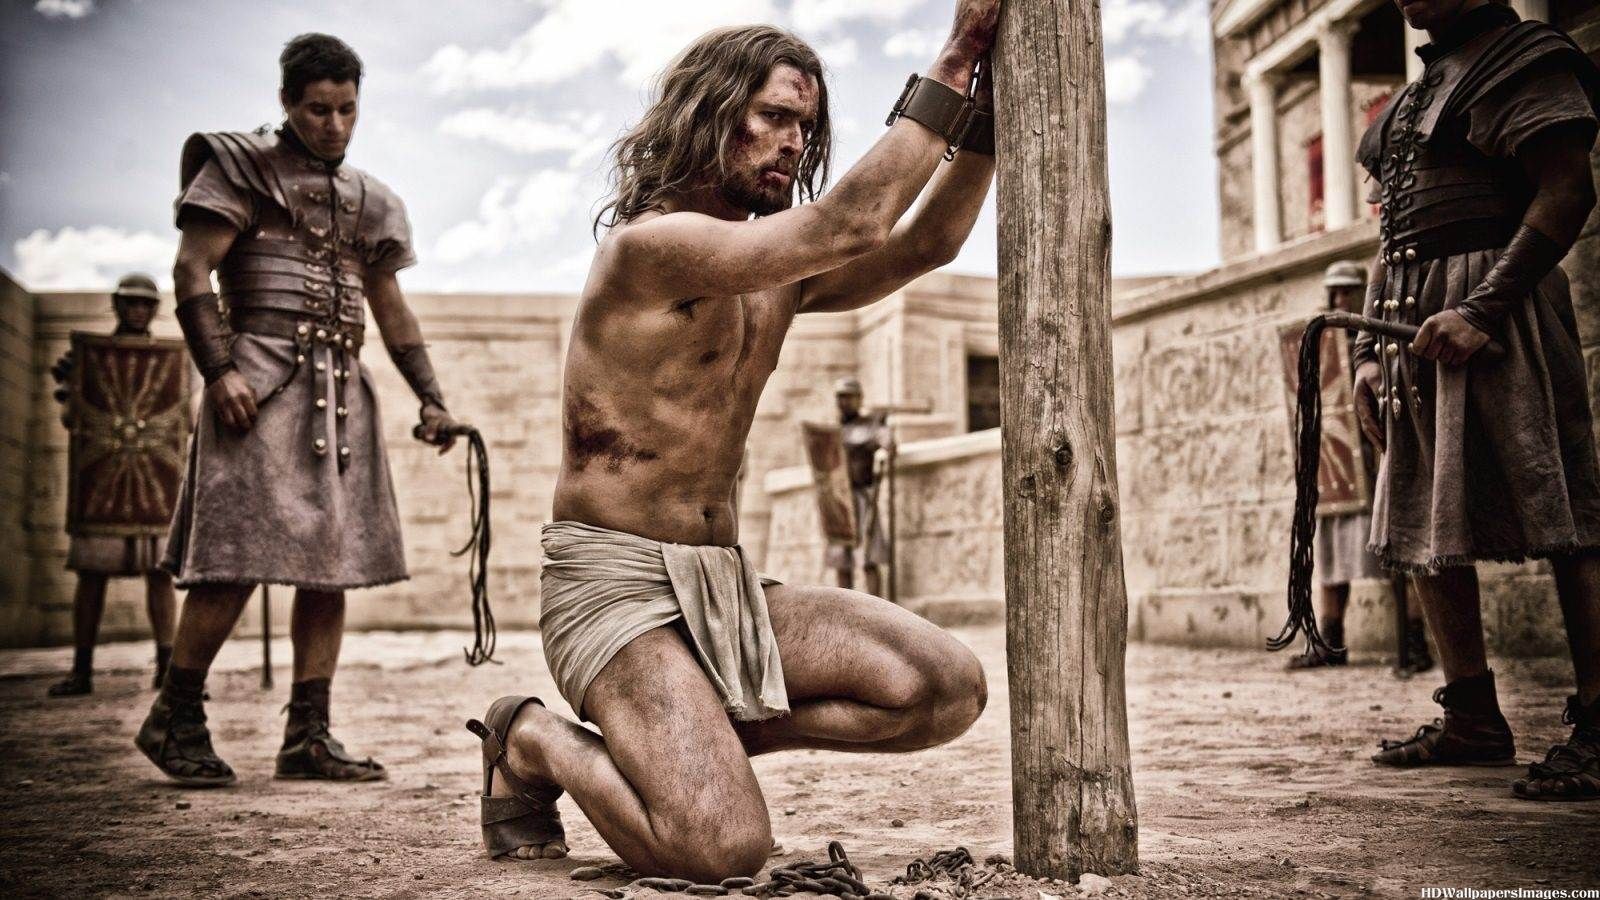 Son Of God Backgrounds, Compatible - PC, Mobile, Gadgets| 1600x900 px